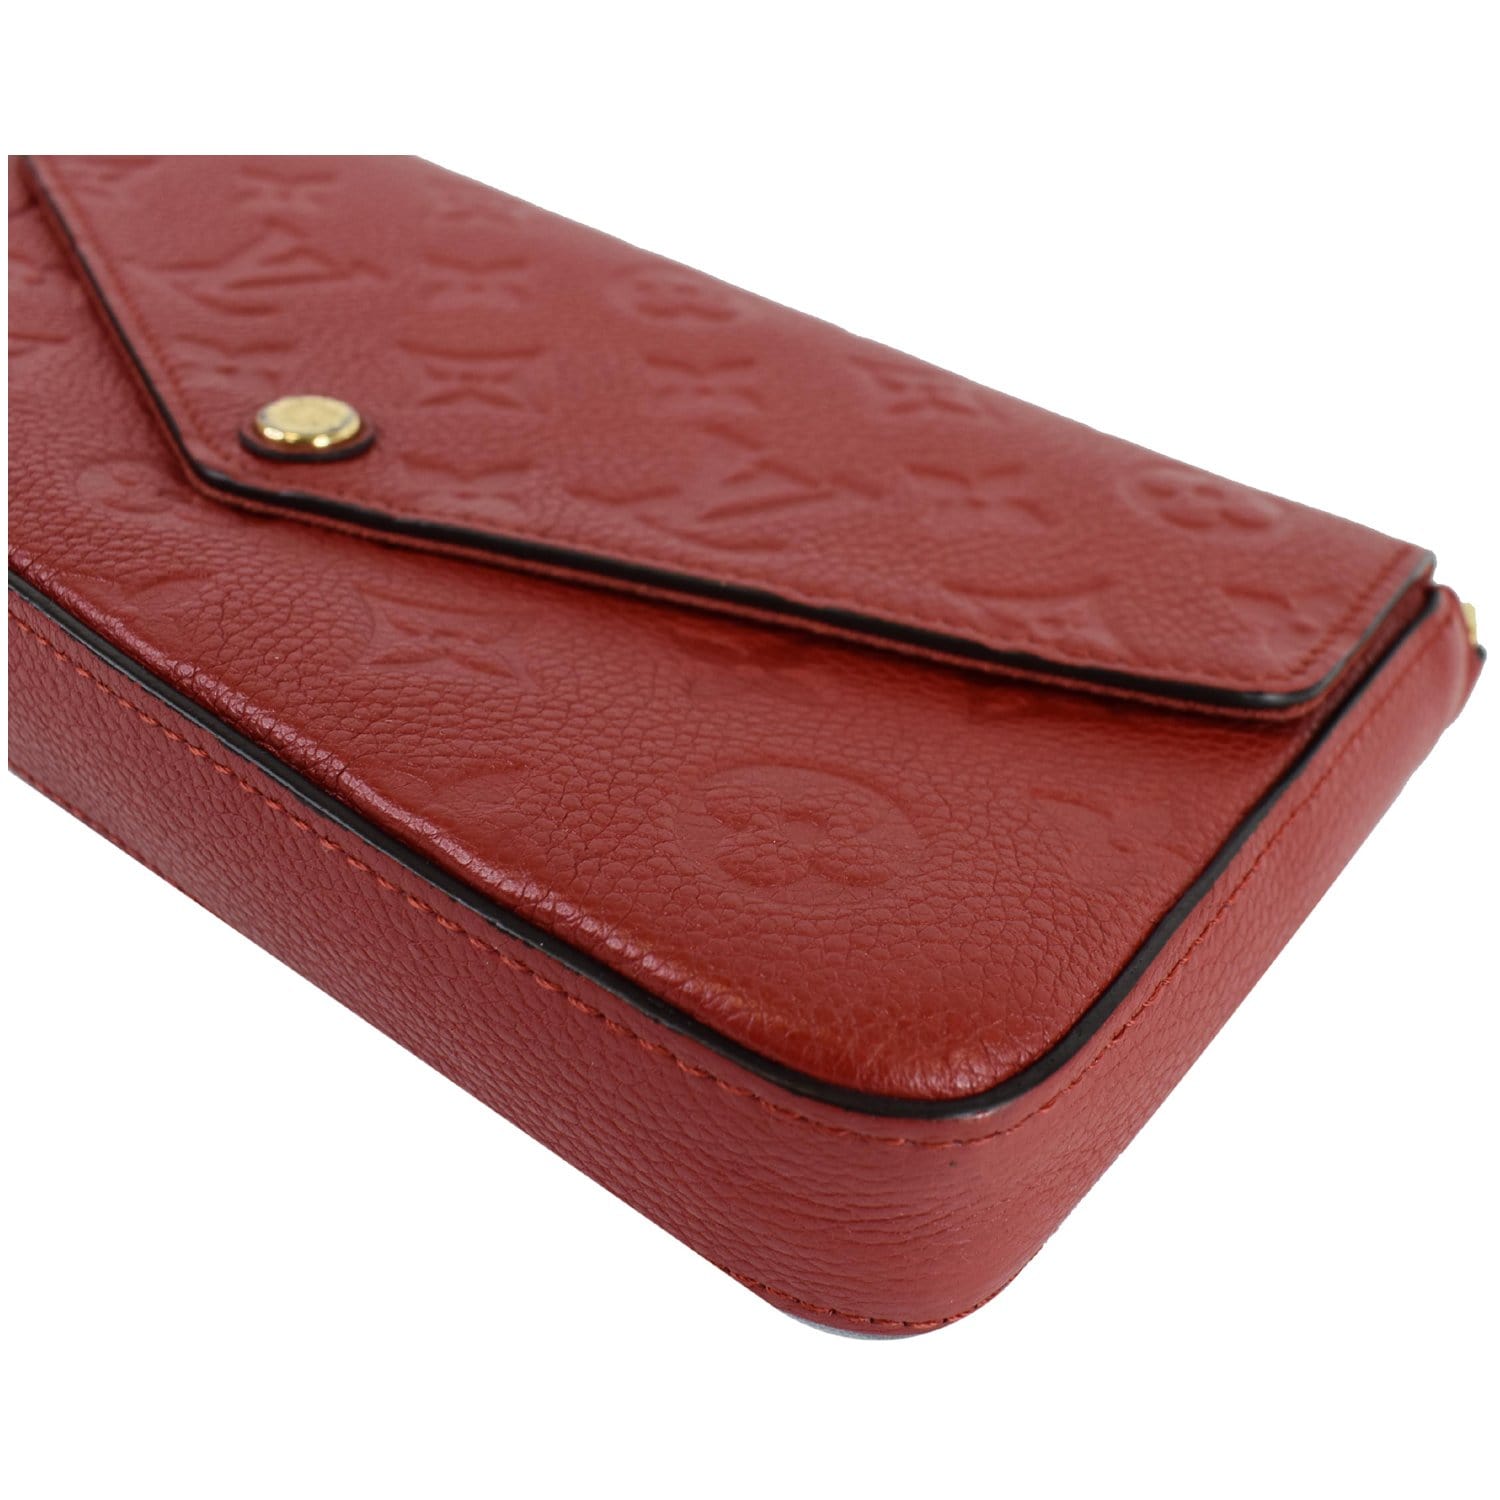 LV Felicie Pochette Red ( Wallet on Chain) Discontinued red color